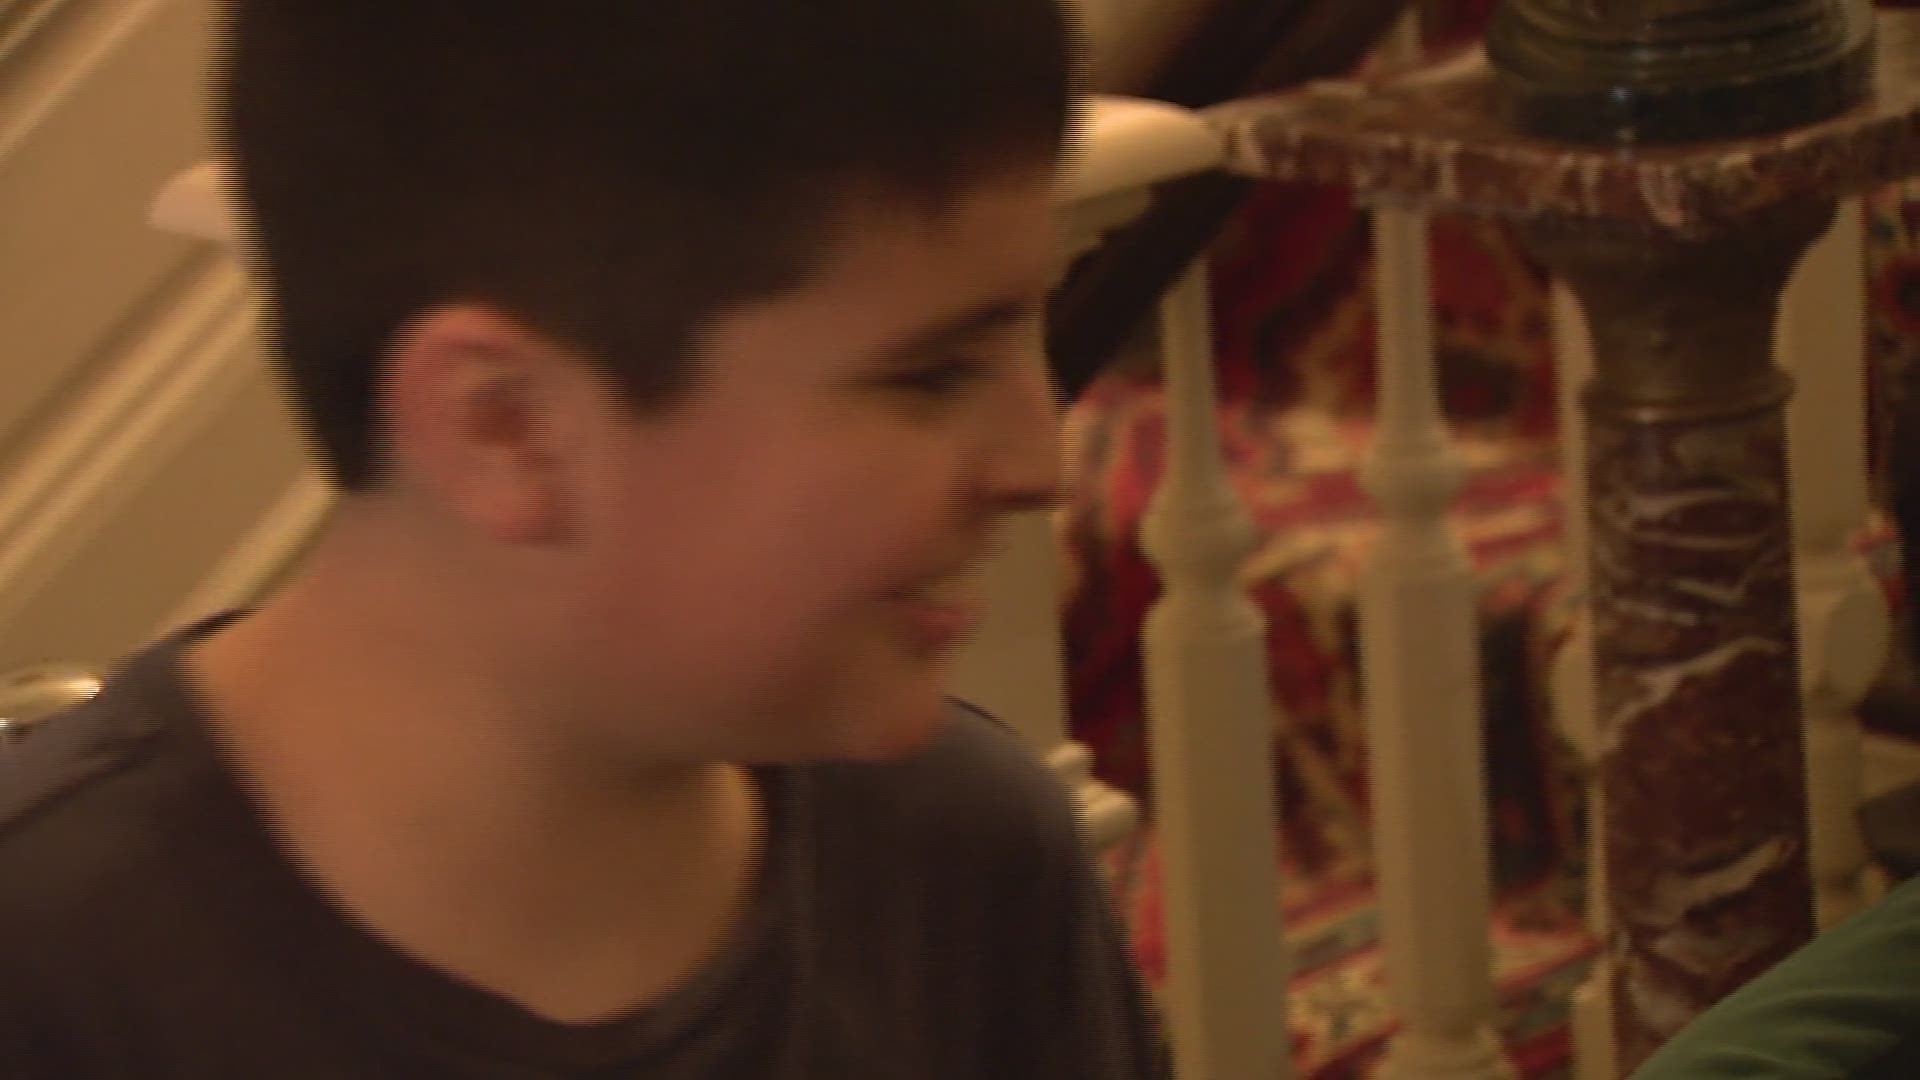 Villa Finale's annual free family night introduced families to the incredible collection of fine and decorative art on display at Villa Finale. Video journalist Ivan Gibson was there.